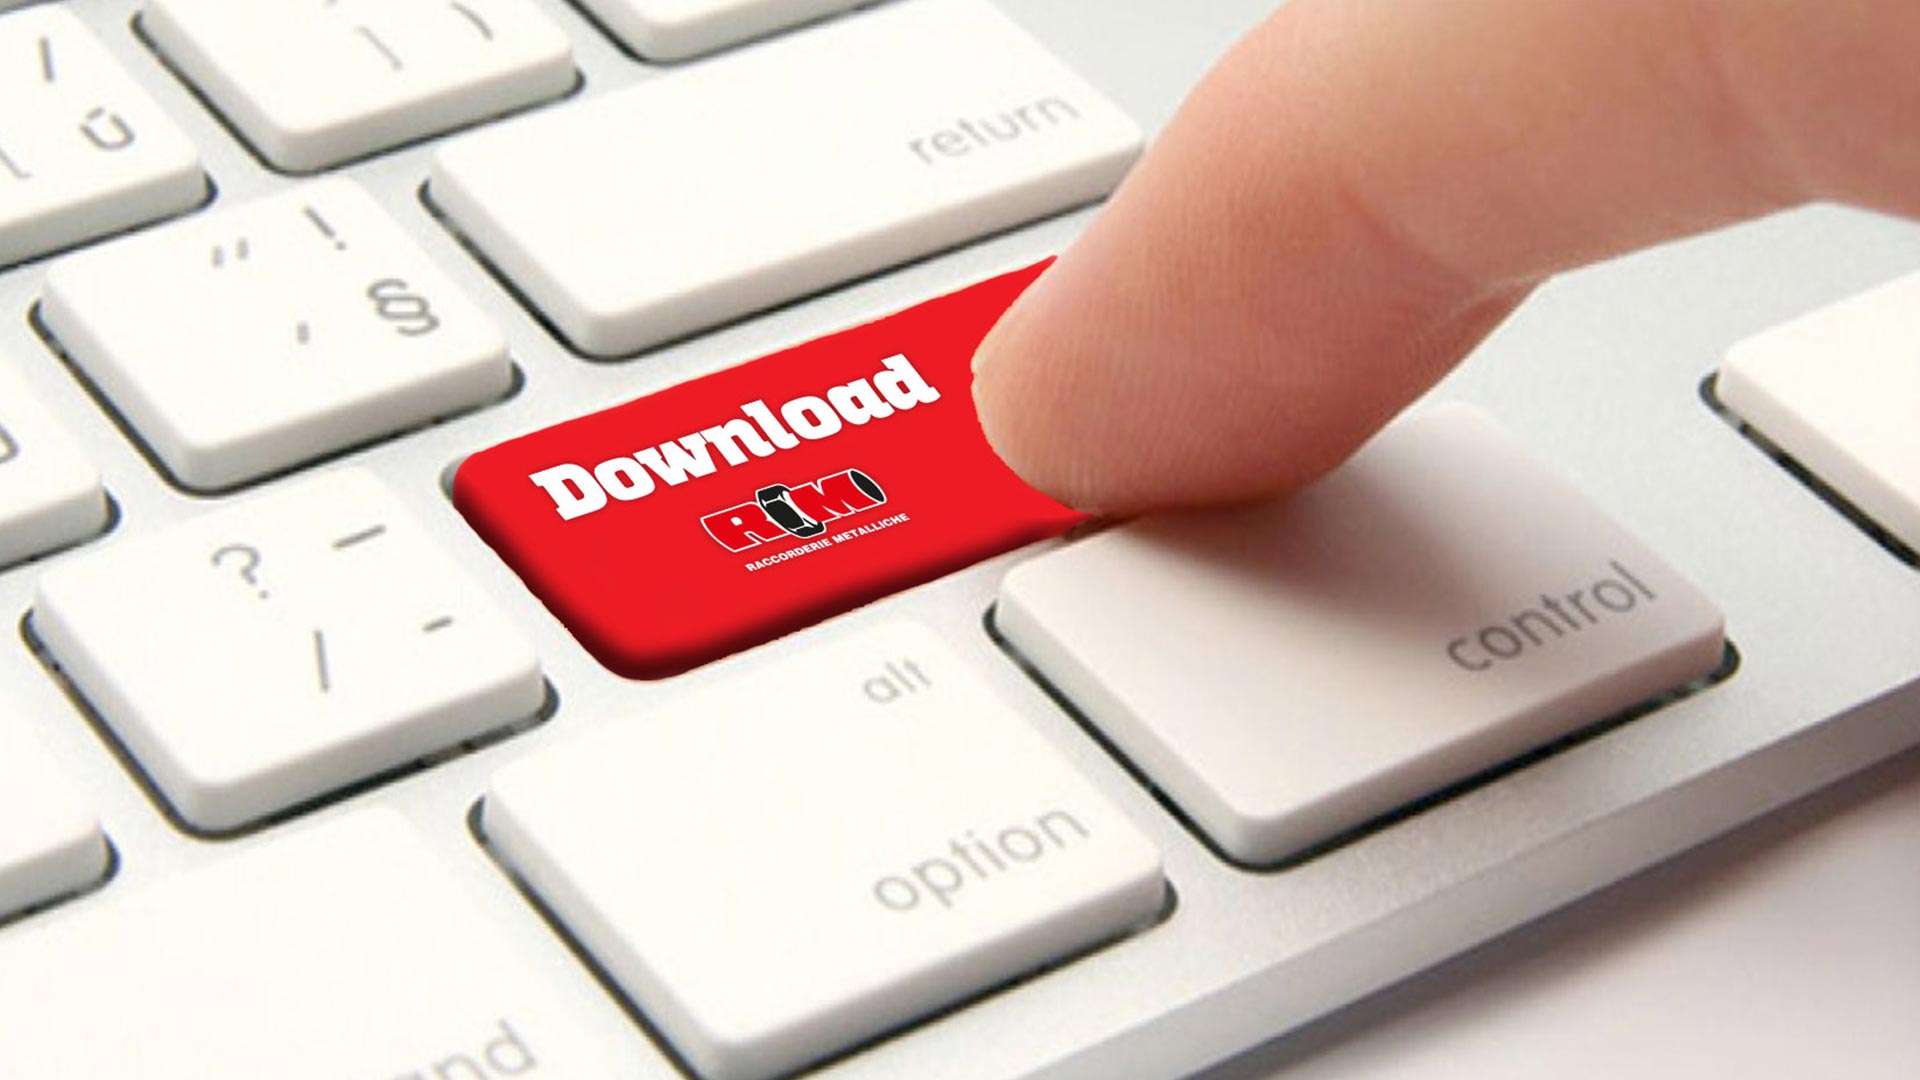 Discover the new Download area!